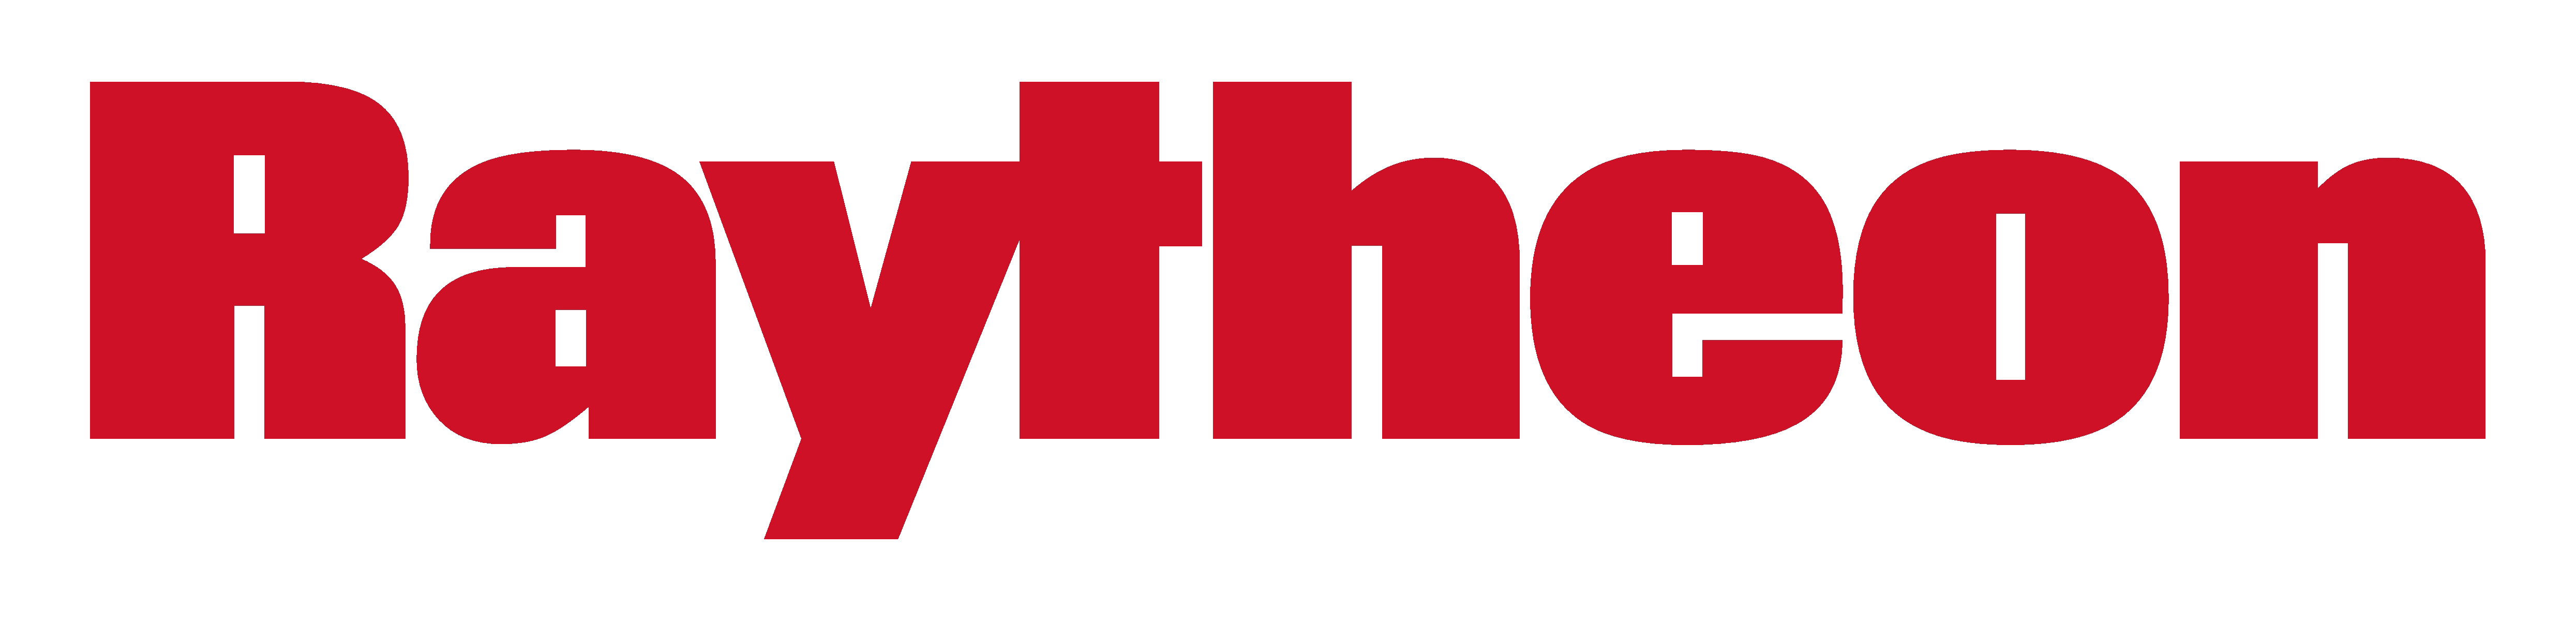 Raytheon Logo PNG Image - PurePNG | Free transparent CC0 PNG Image Library